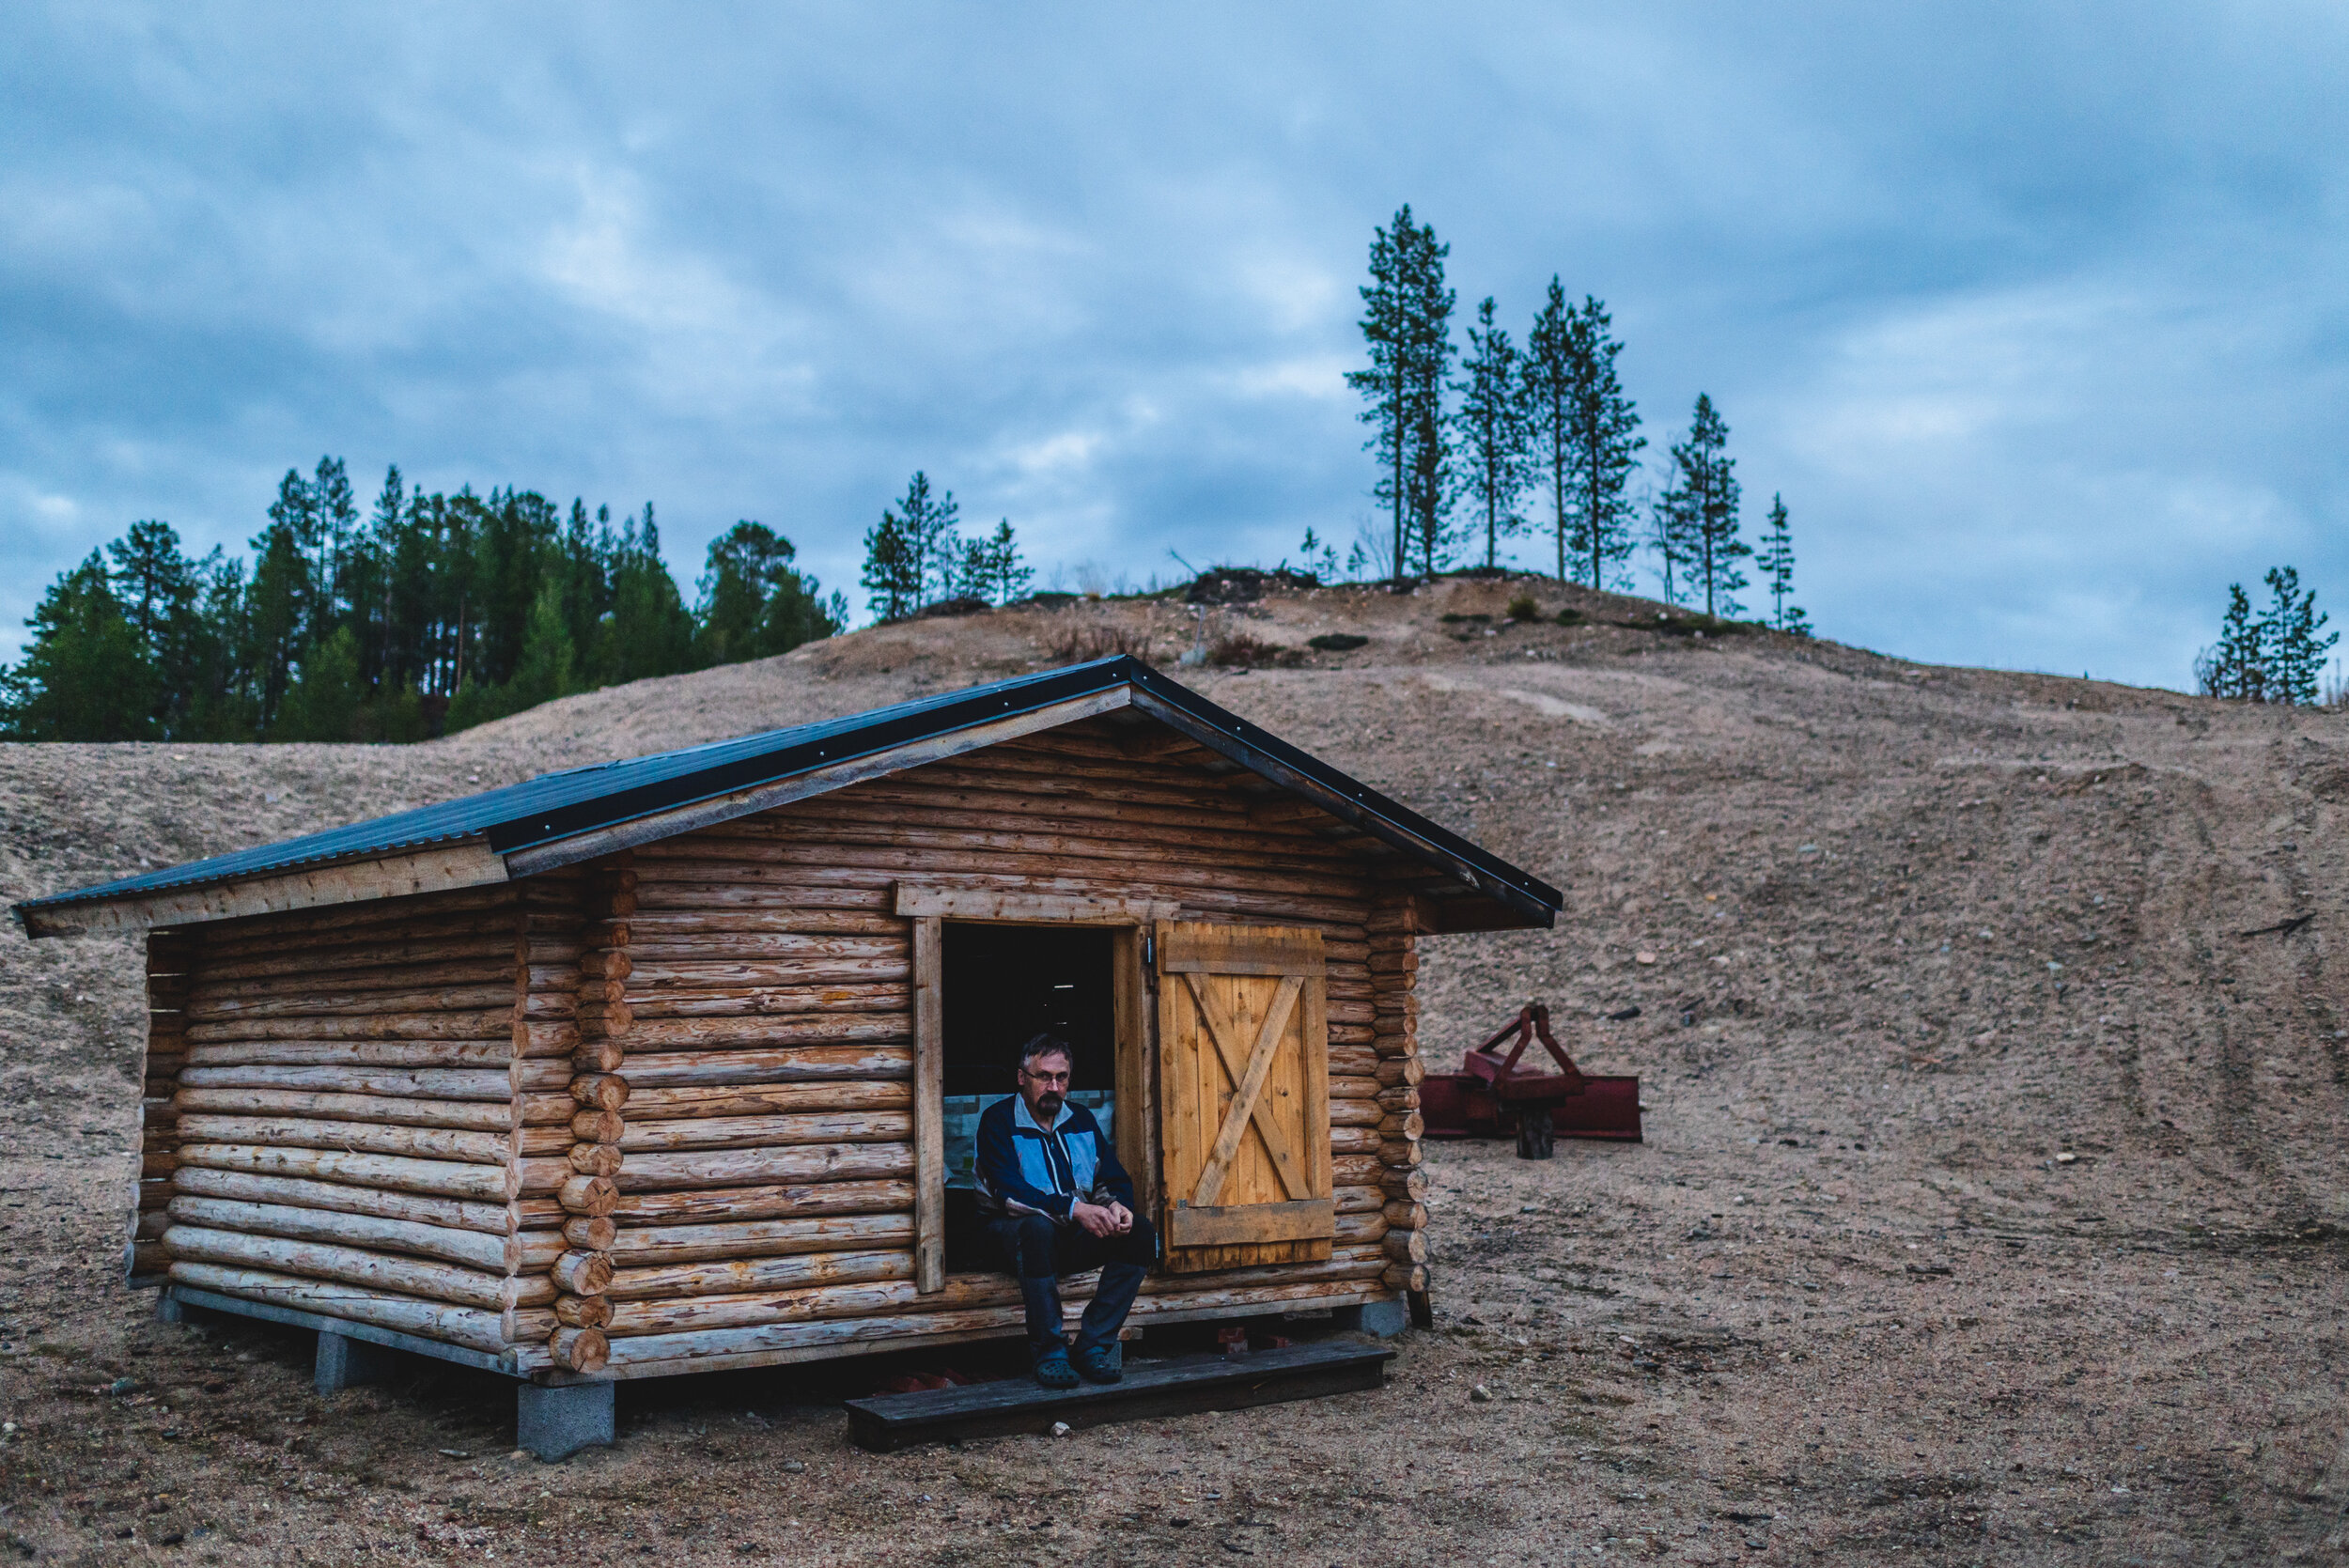  Enontekiö, 2020. Lasse Tapani built a shed in a gravel pit situated right next to his home. 